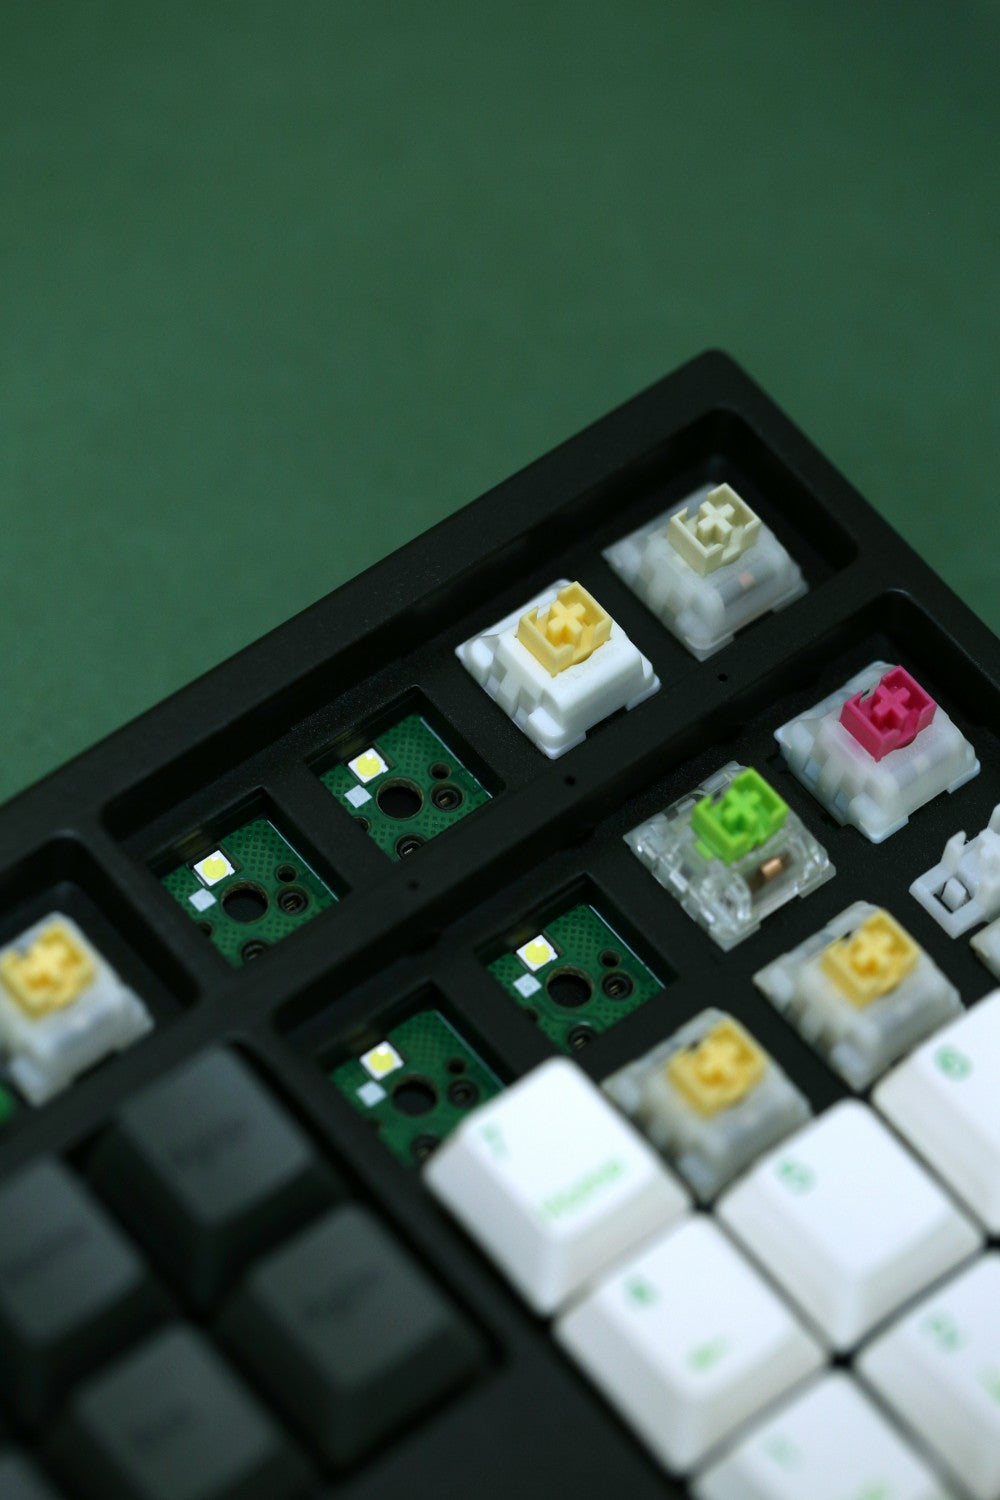 panda keyboard is hot-swappable